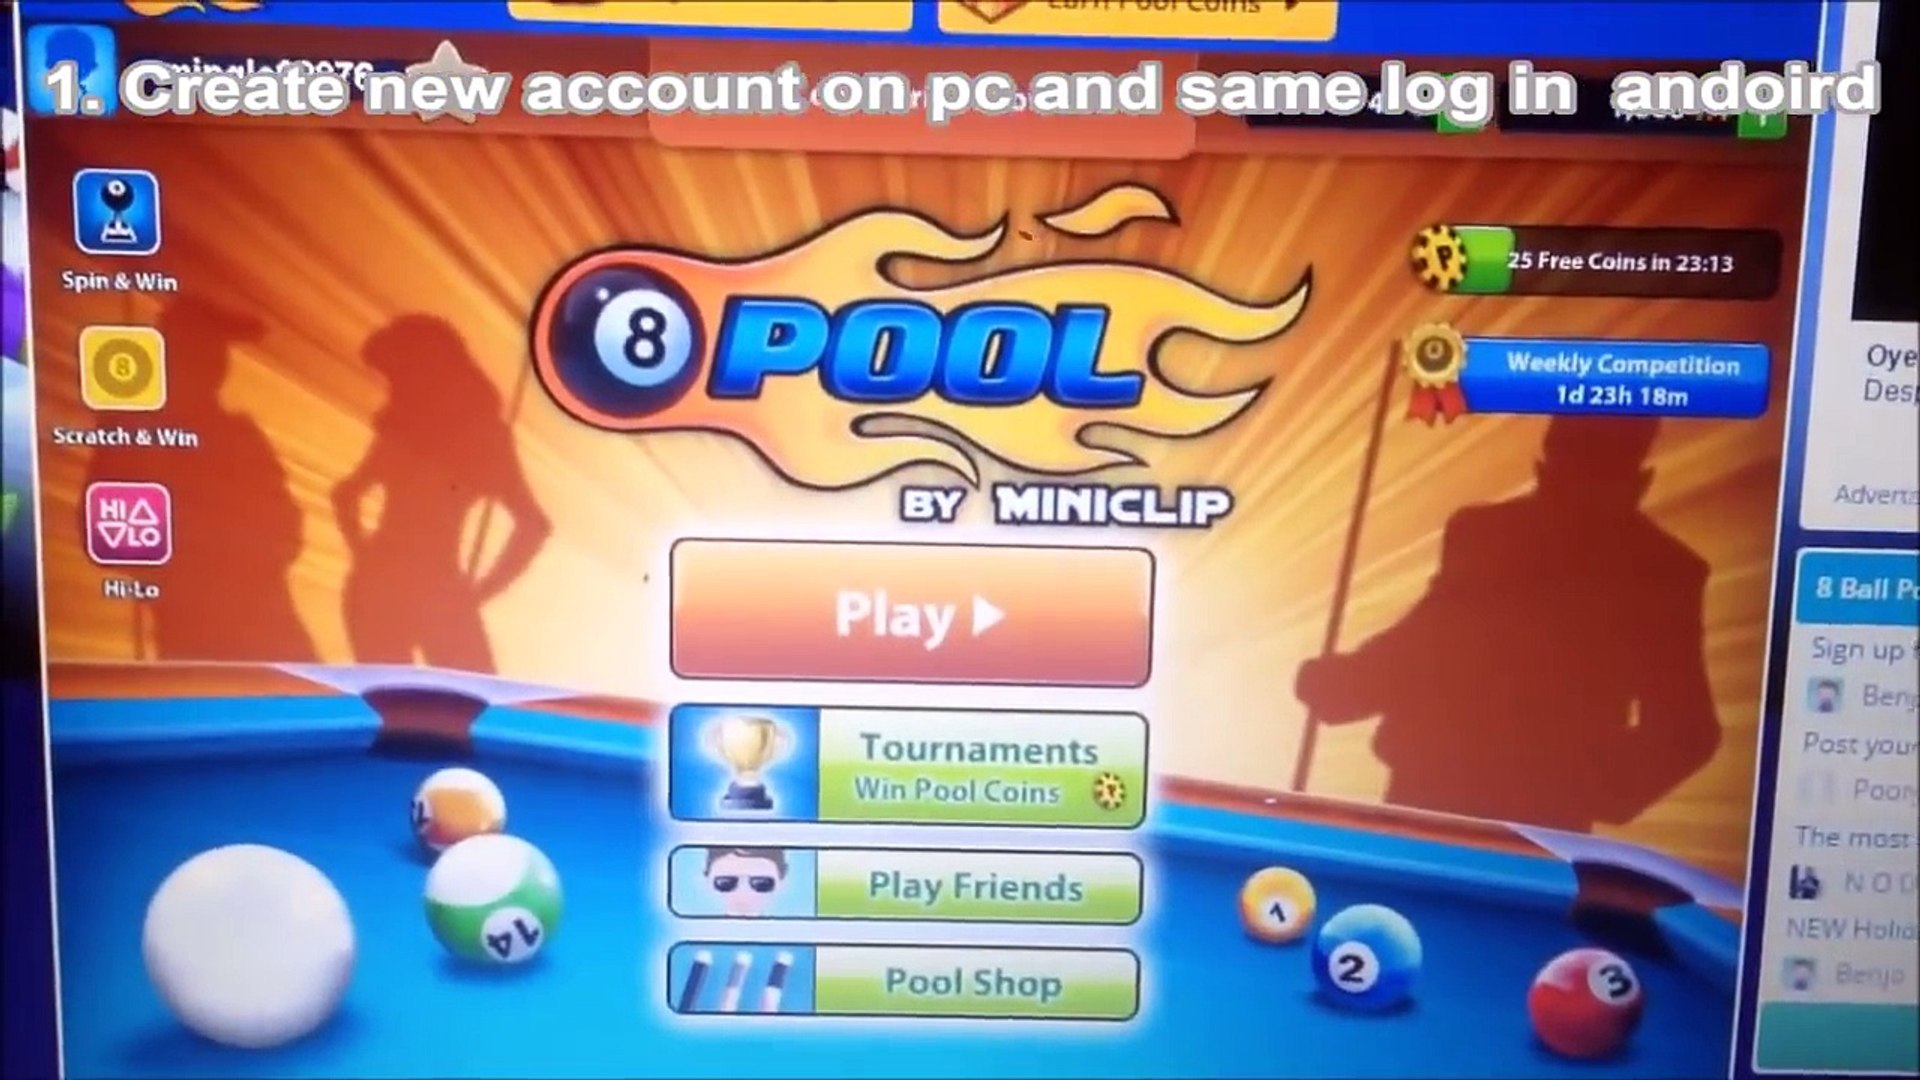 8 Ball Pool Cash Trick On Fire!!!! Updated (patched) - 